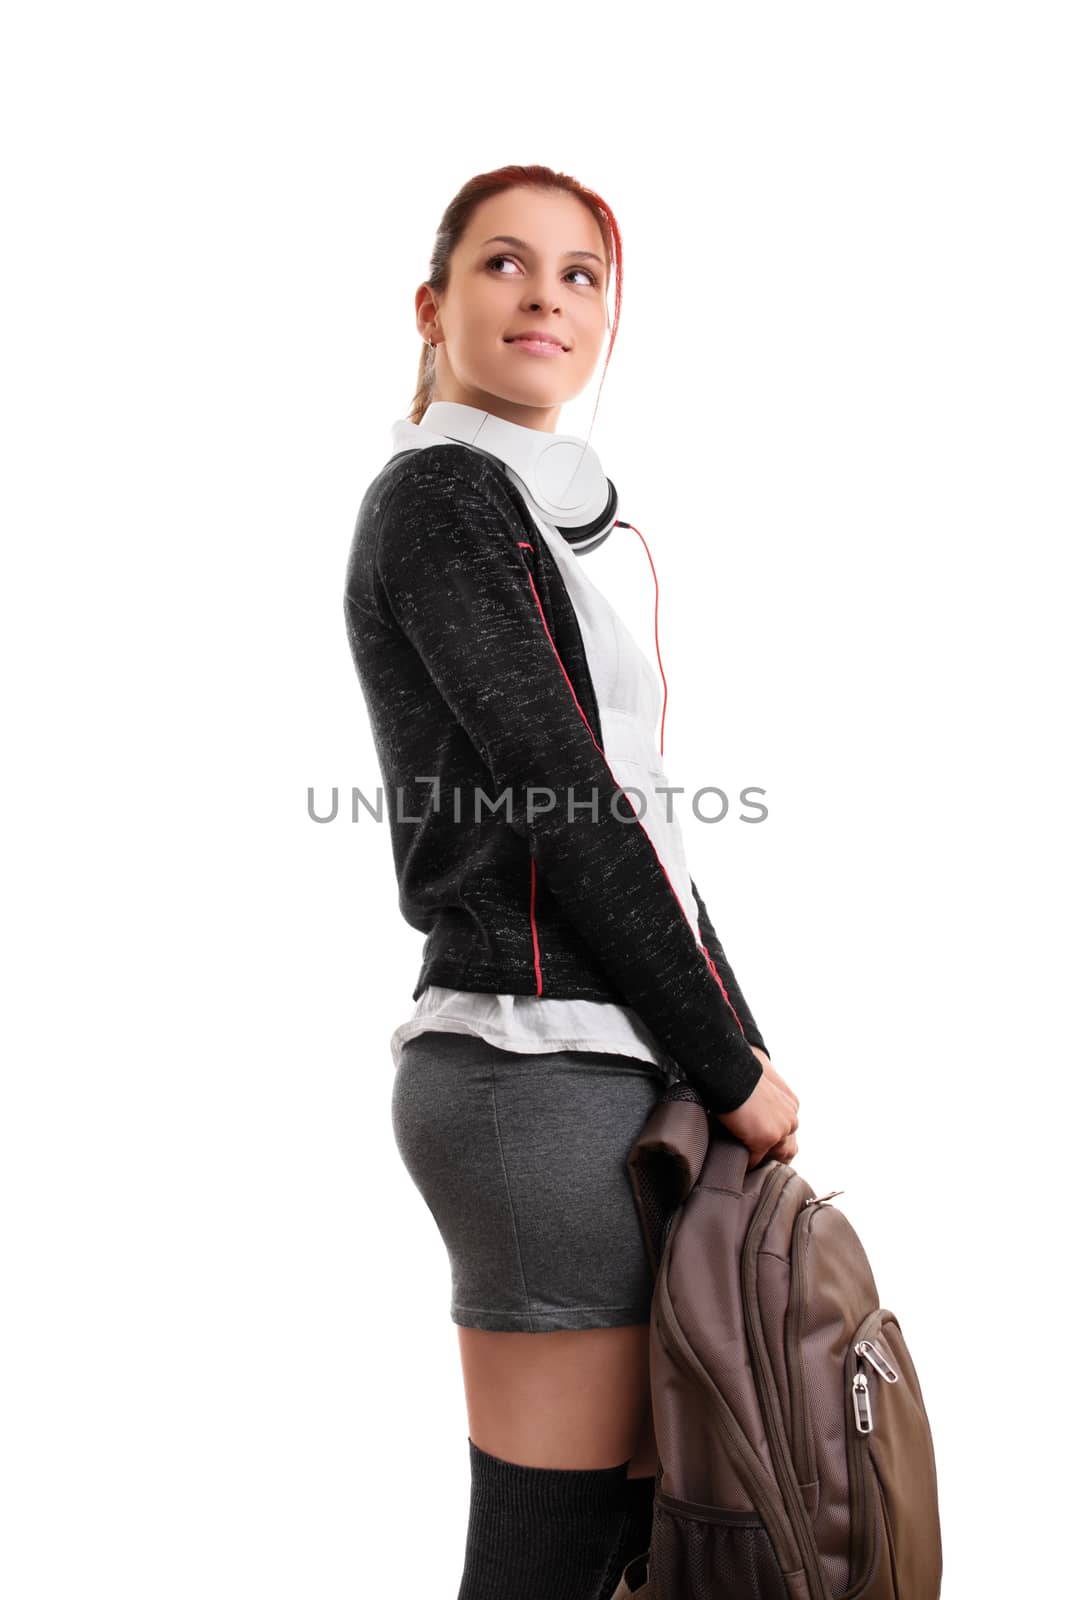 Attractive student with headphones and backpack by Mendelex